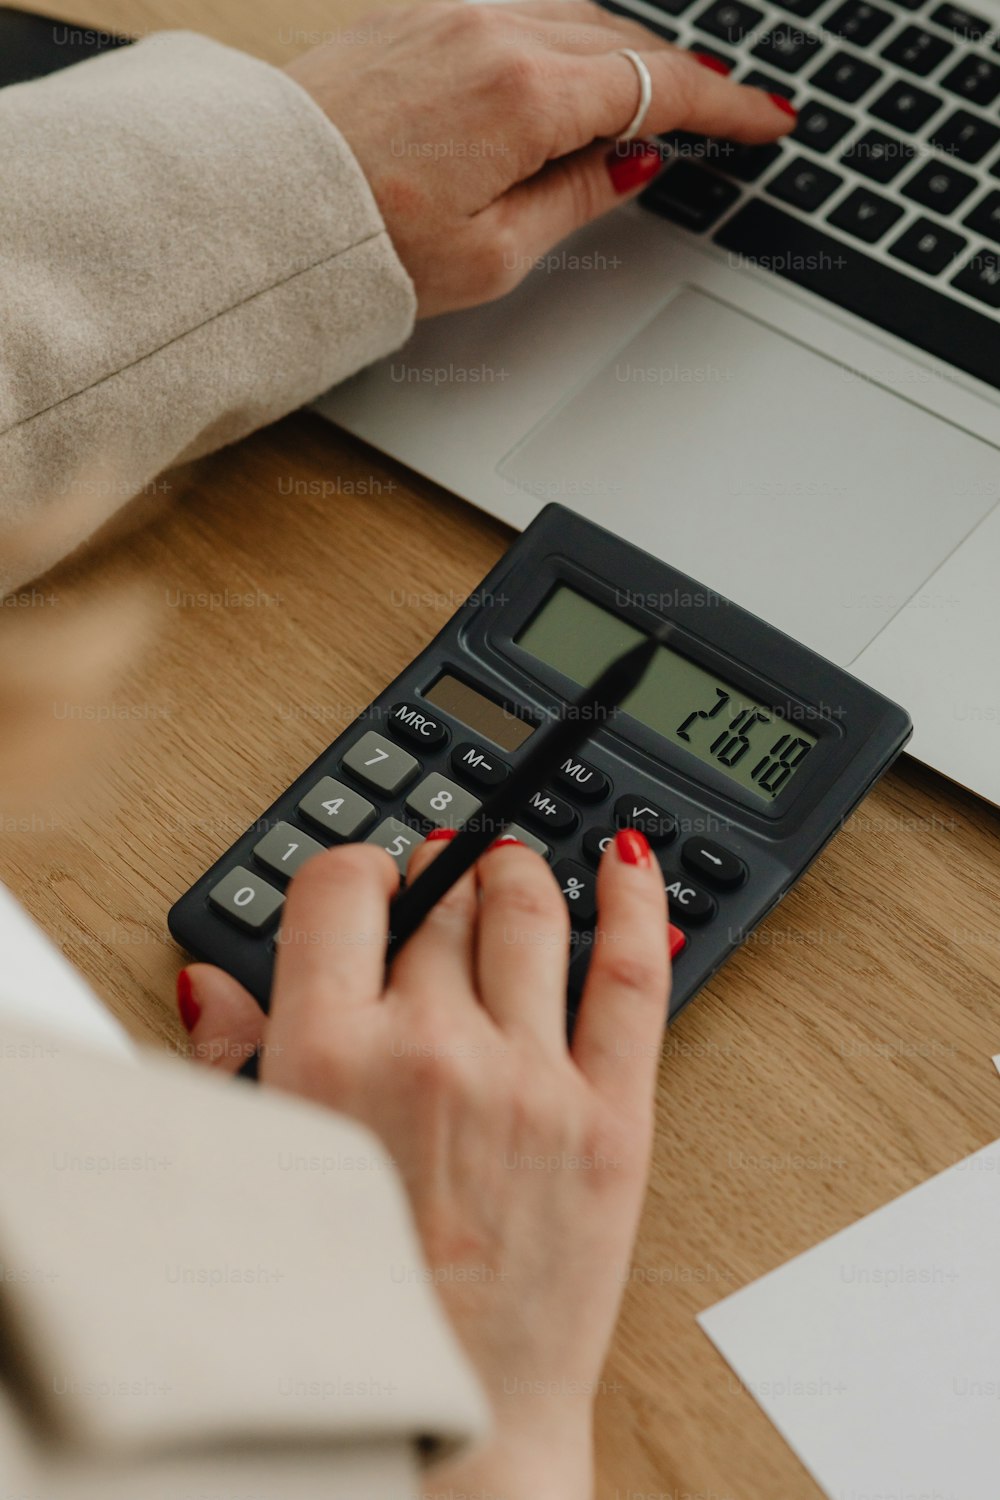 a woman is using a calculator on a desk